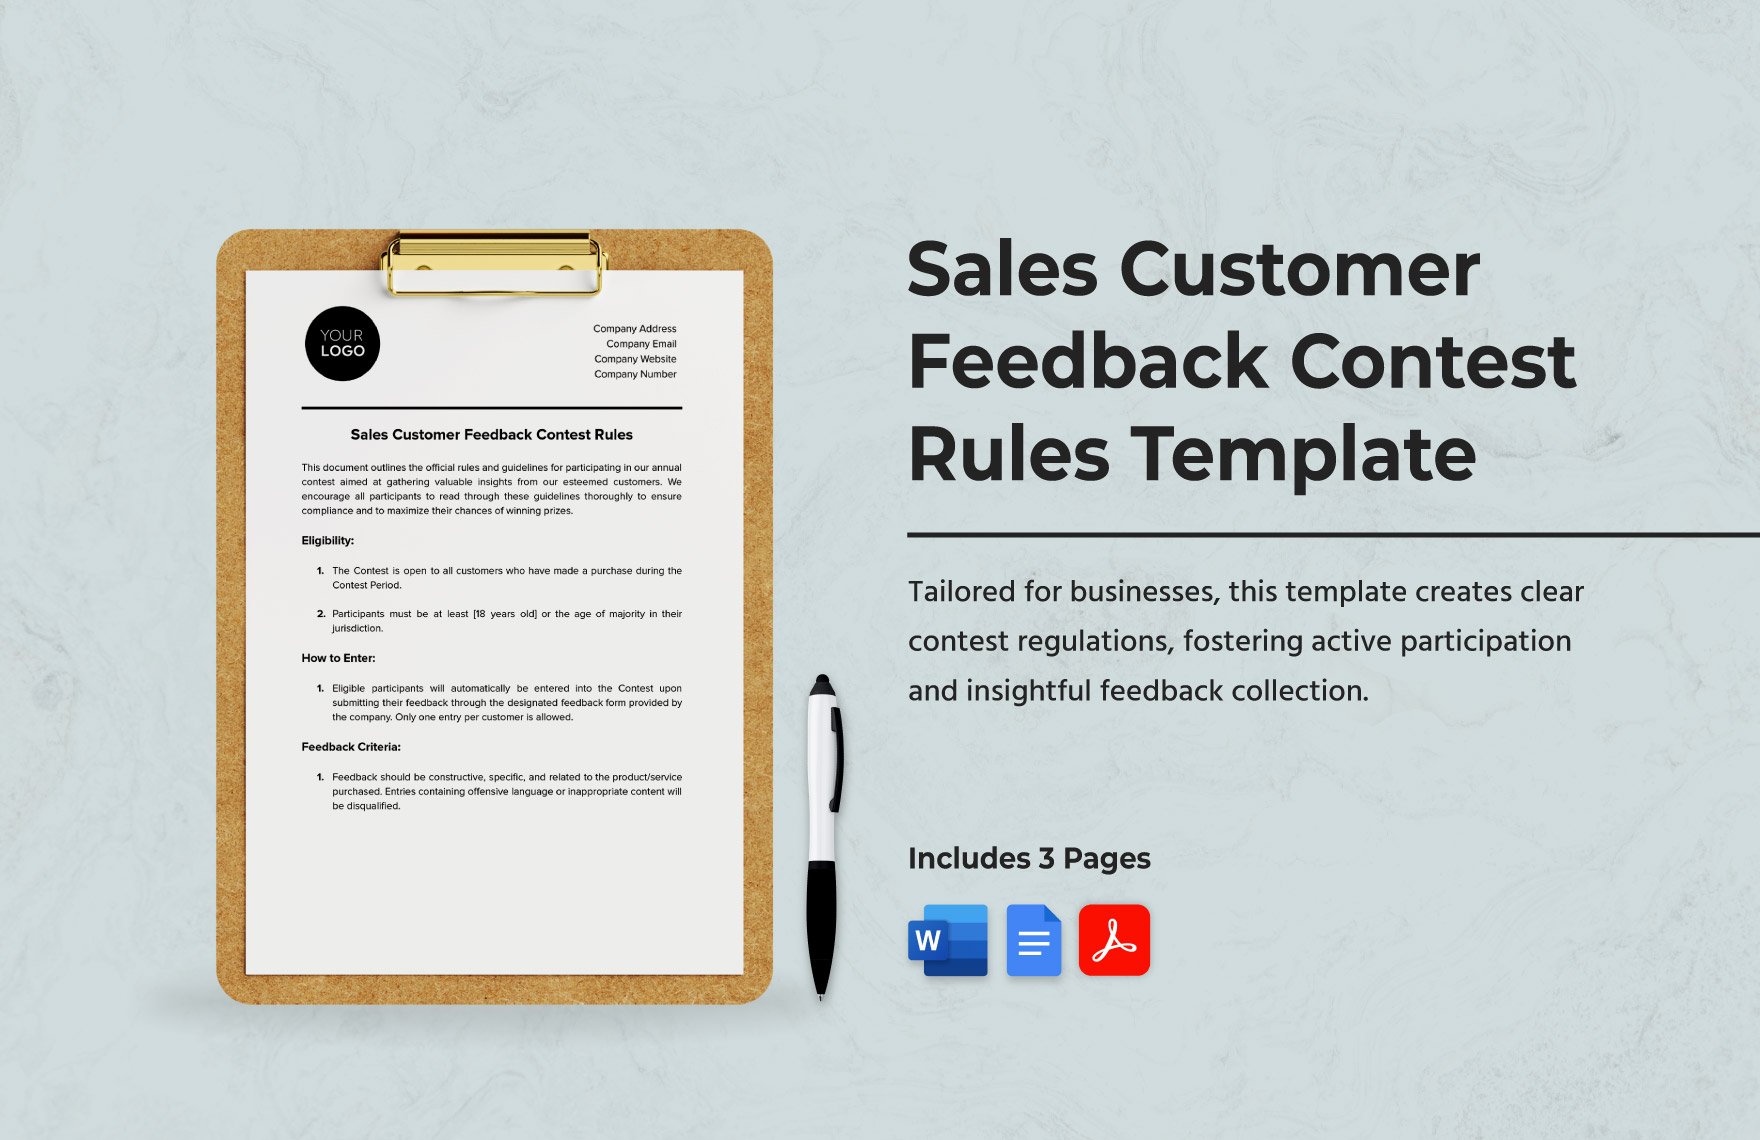 Sales Customer Feedback Contest Rules Template